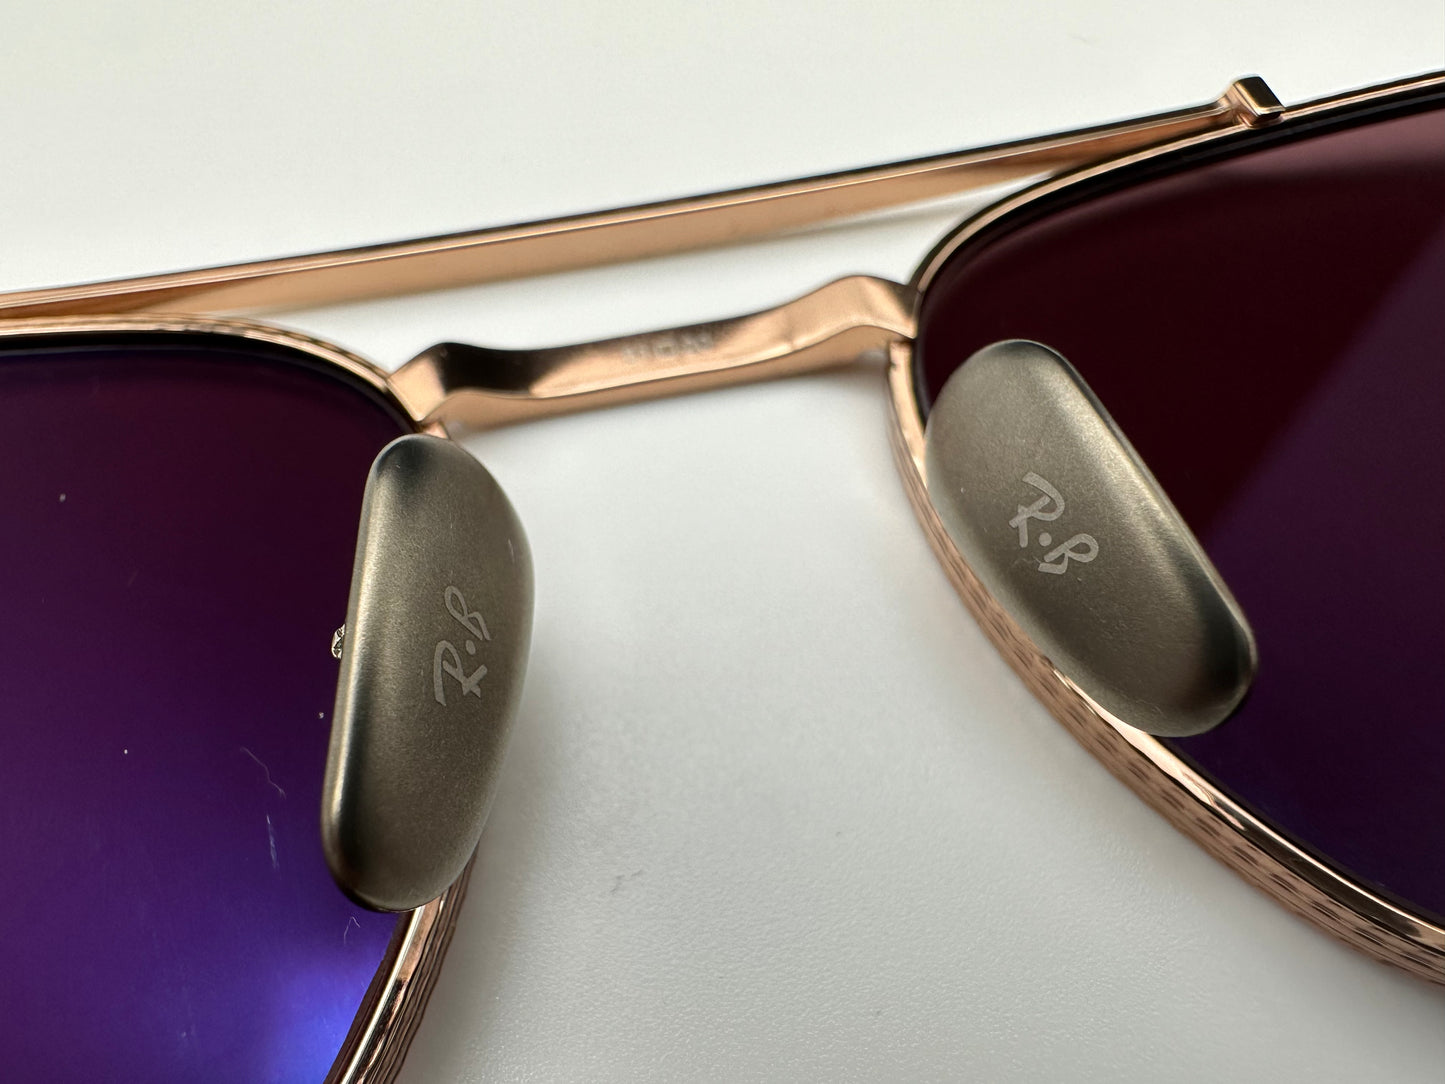 Ray Ban Frank II Titanium RB 8258 51mm Polarized Dark Violet Rose Gold Made in Japan NEW